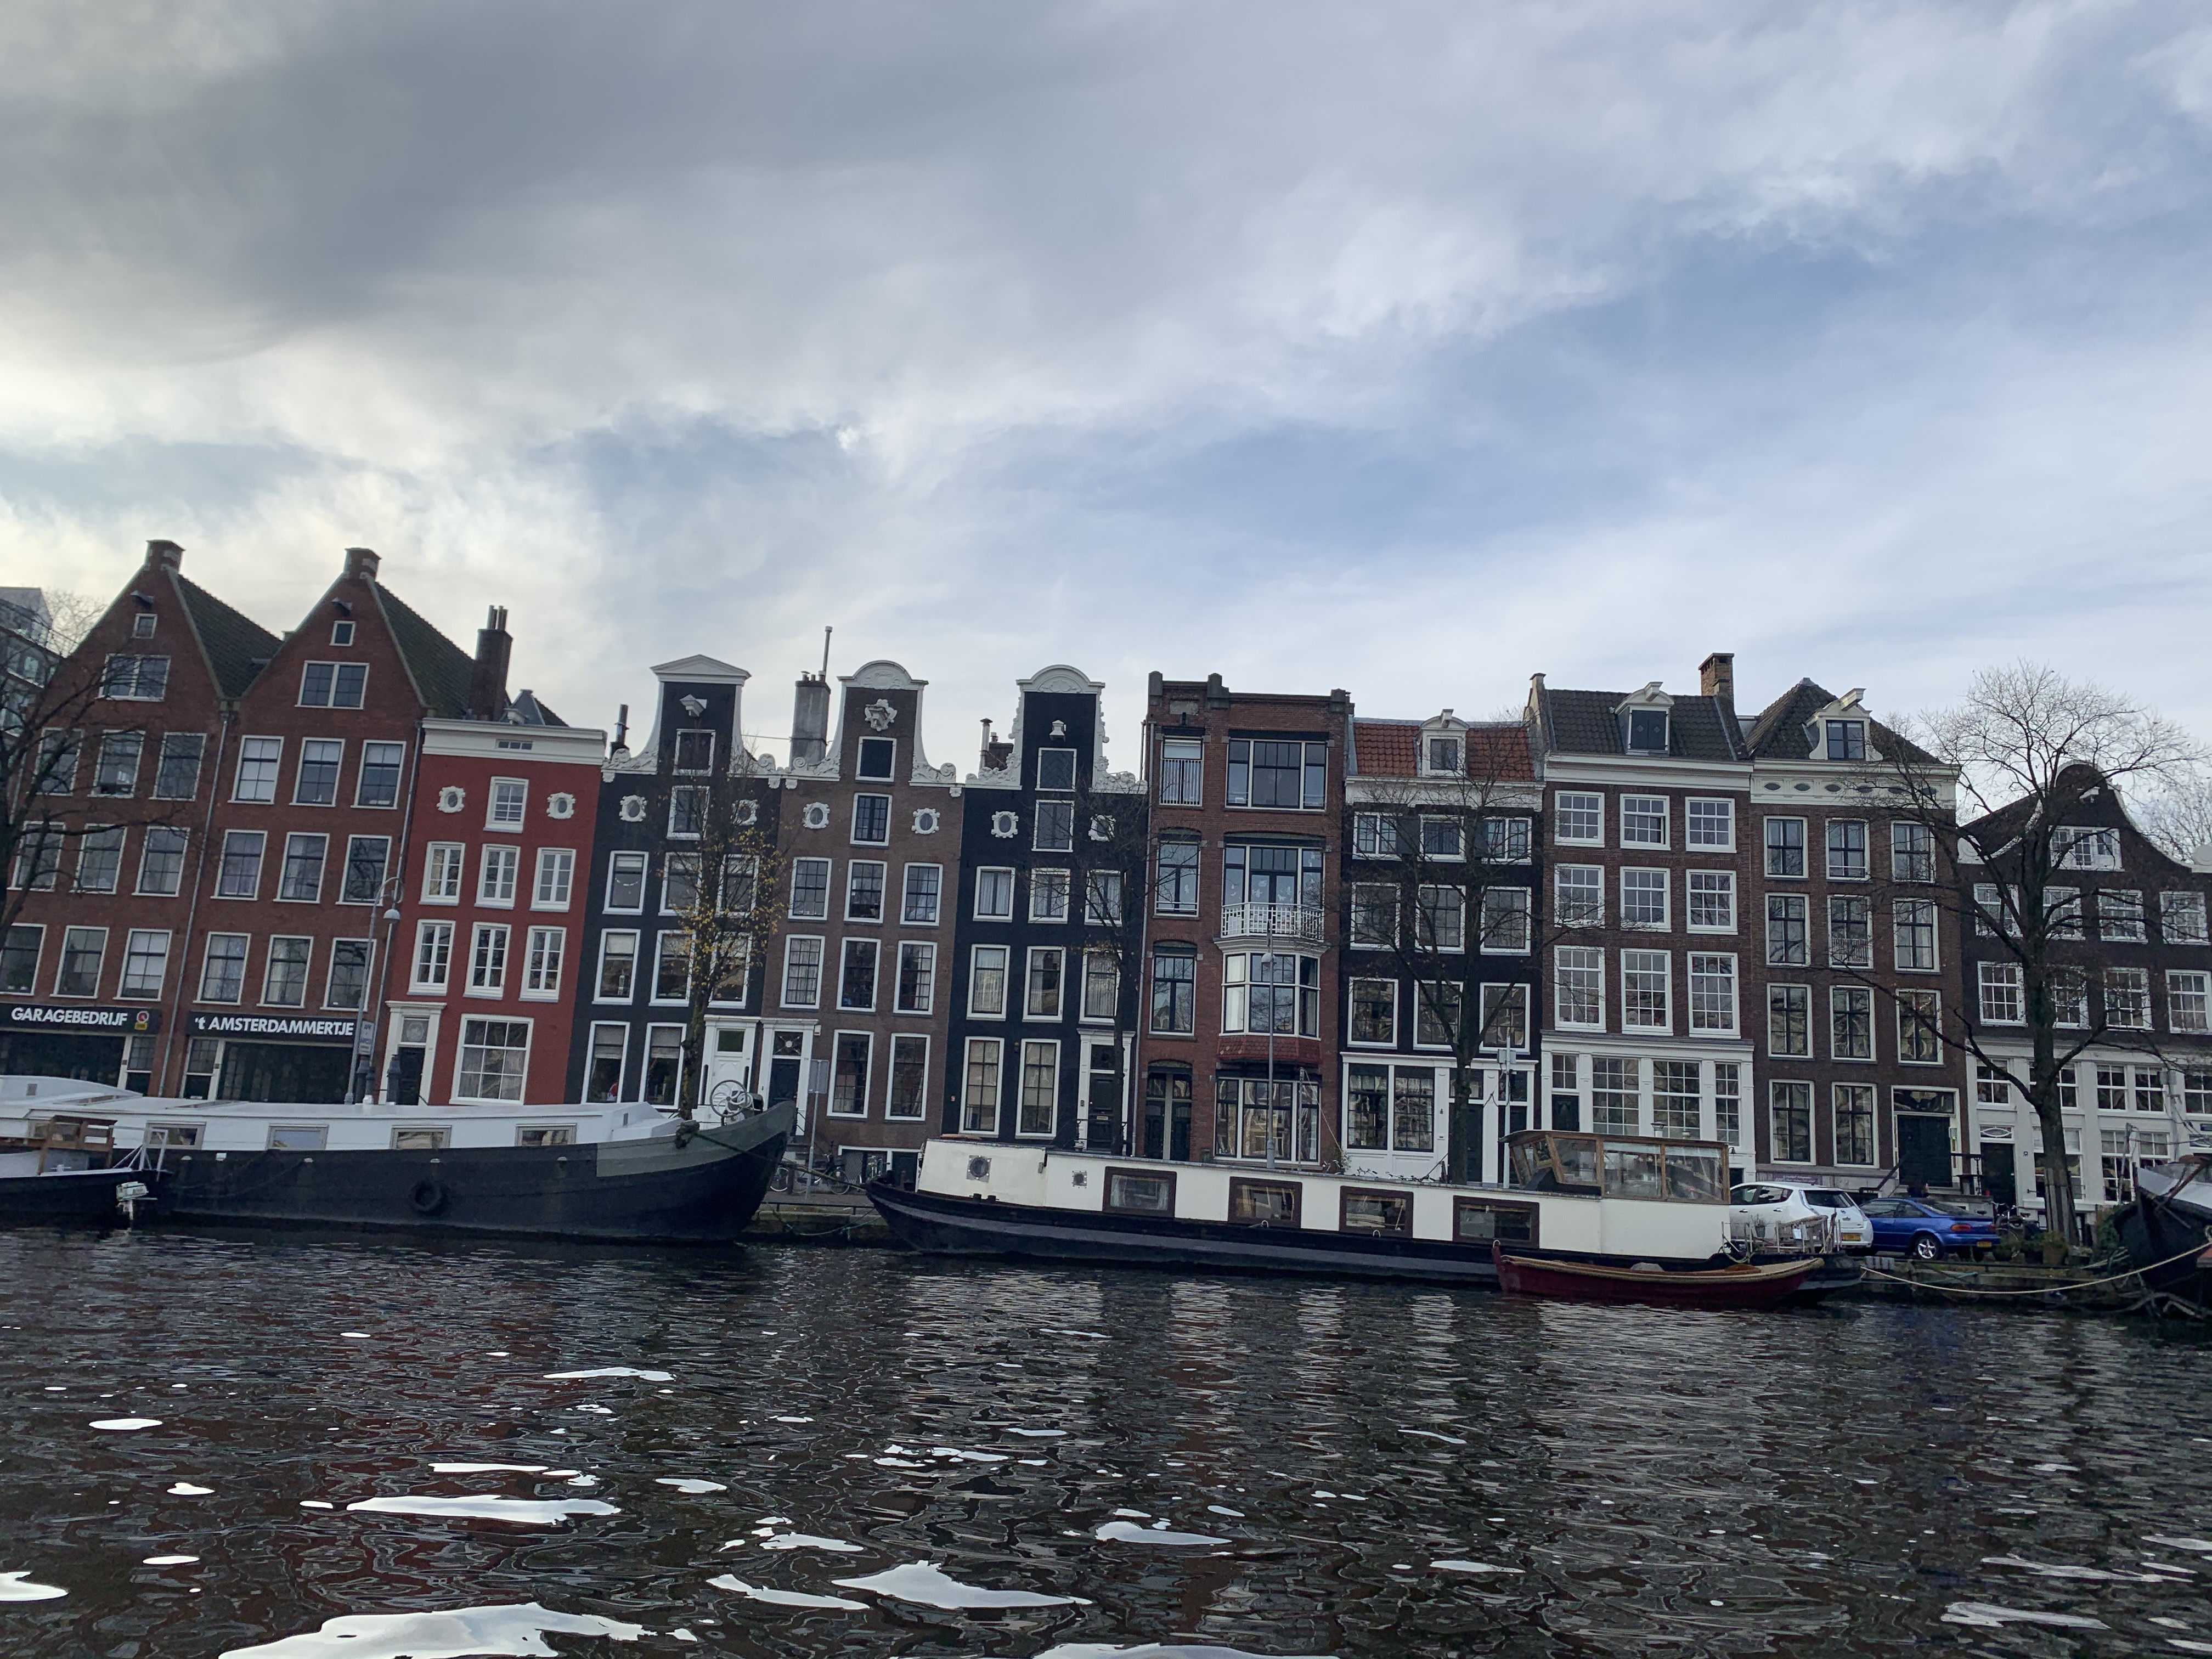 Typical buildings in Amsterdam on a canal lined with barges